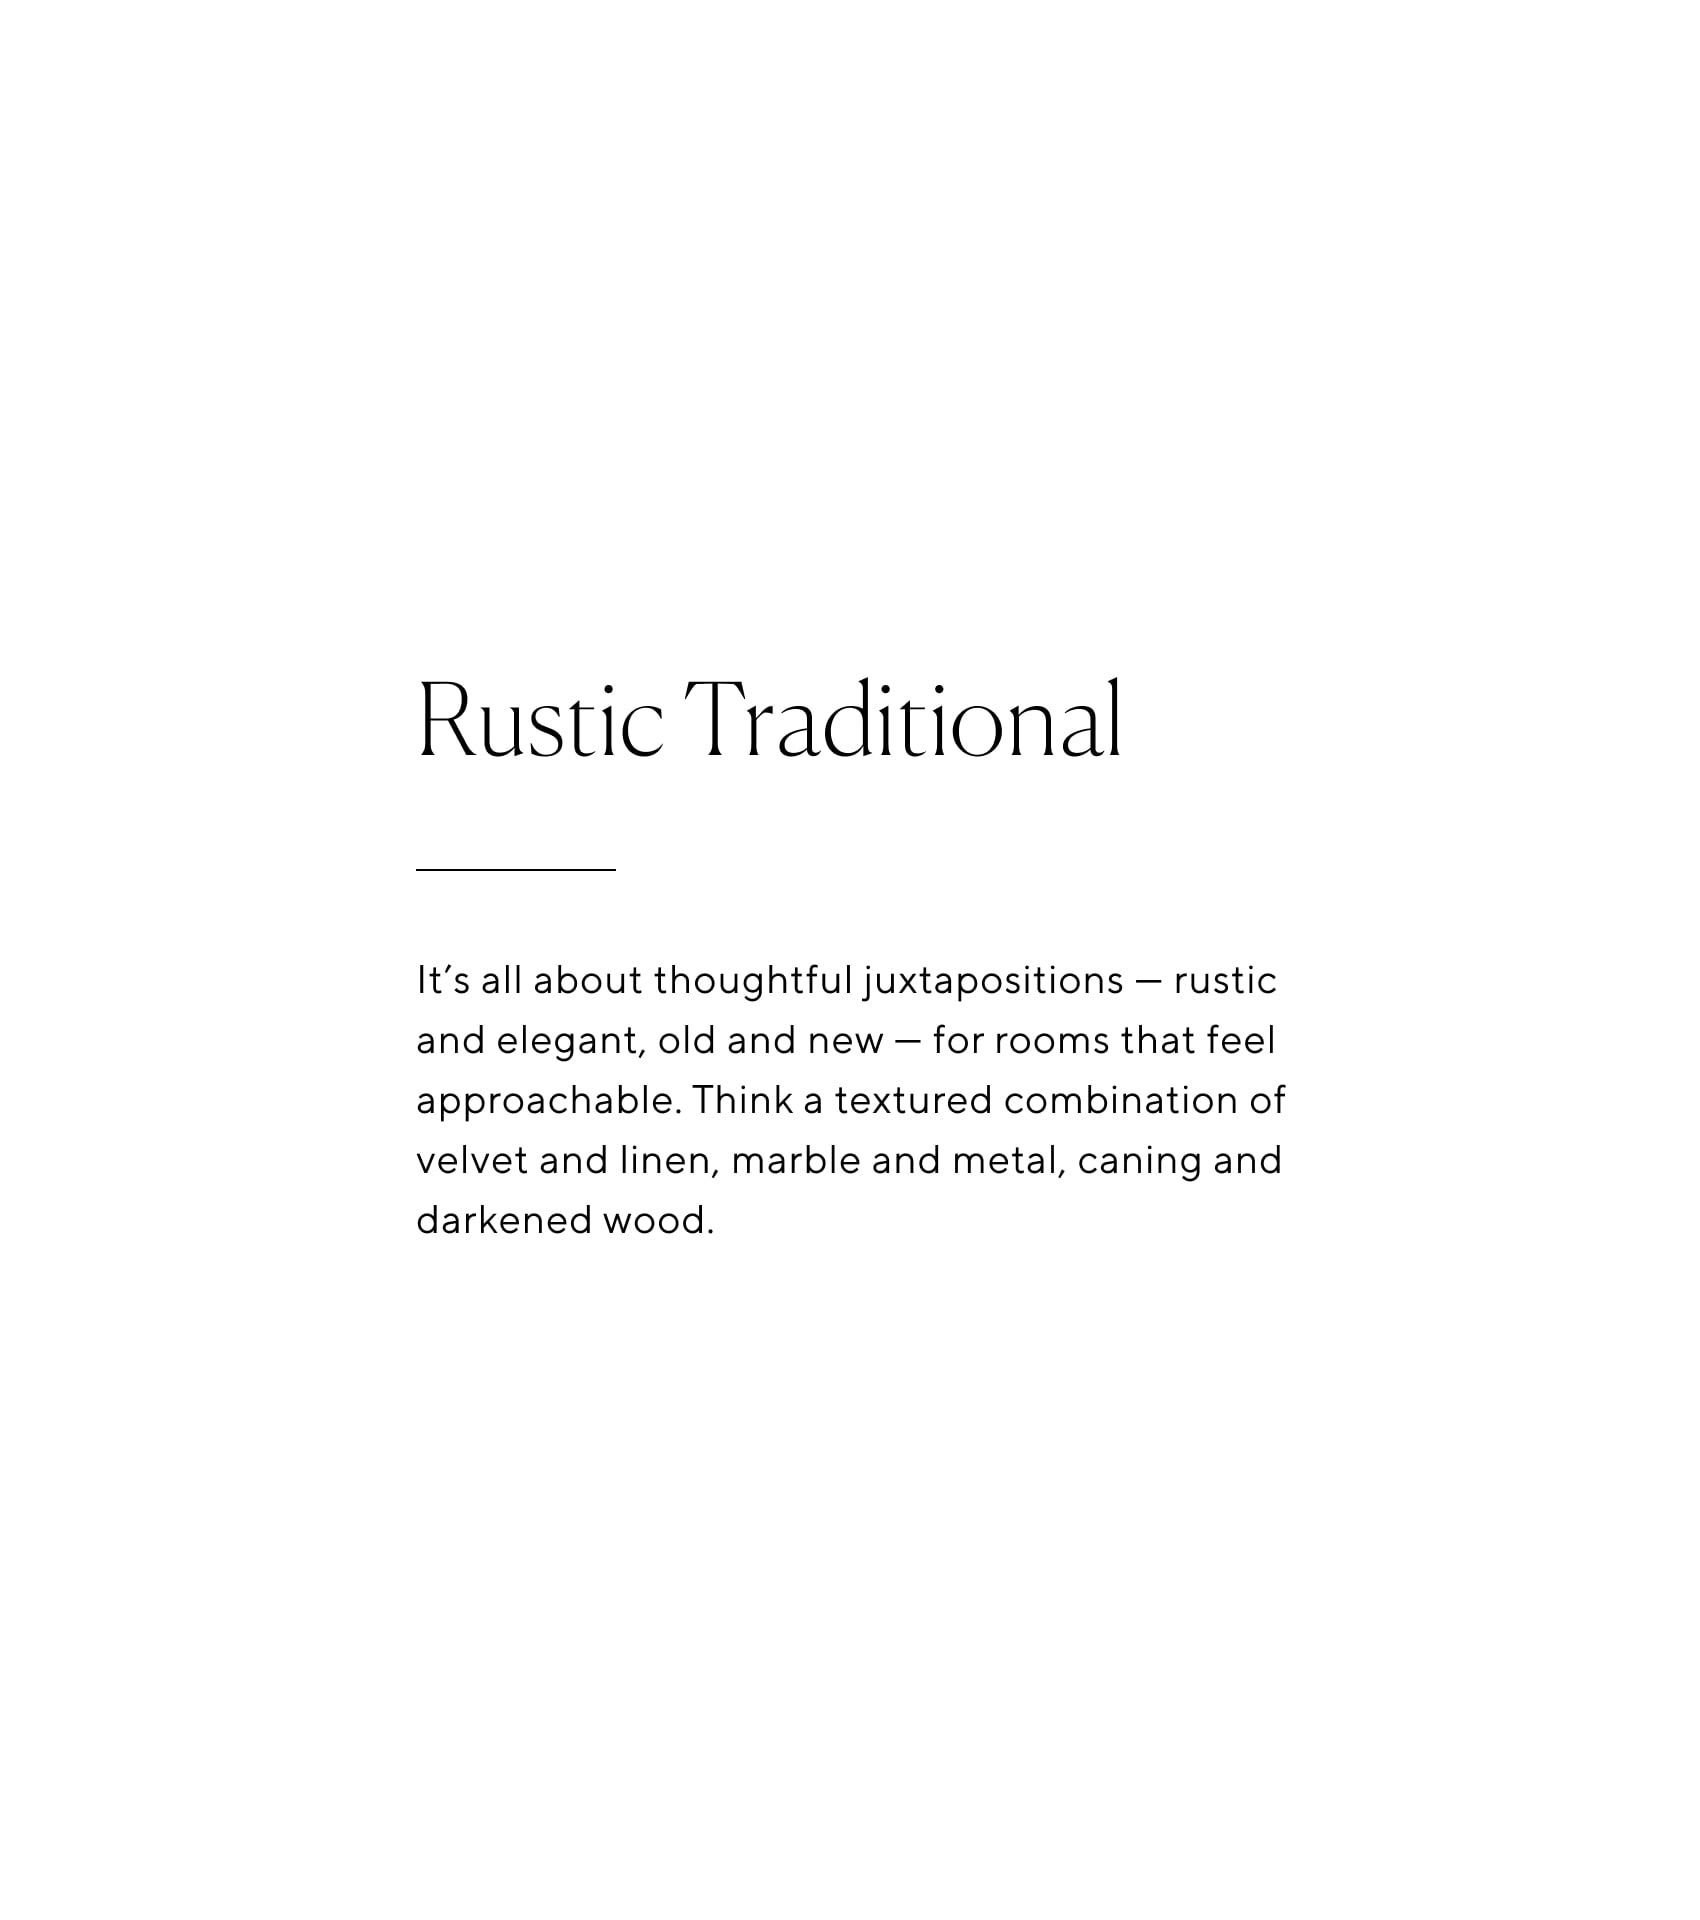 Rustic Traditional